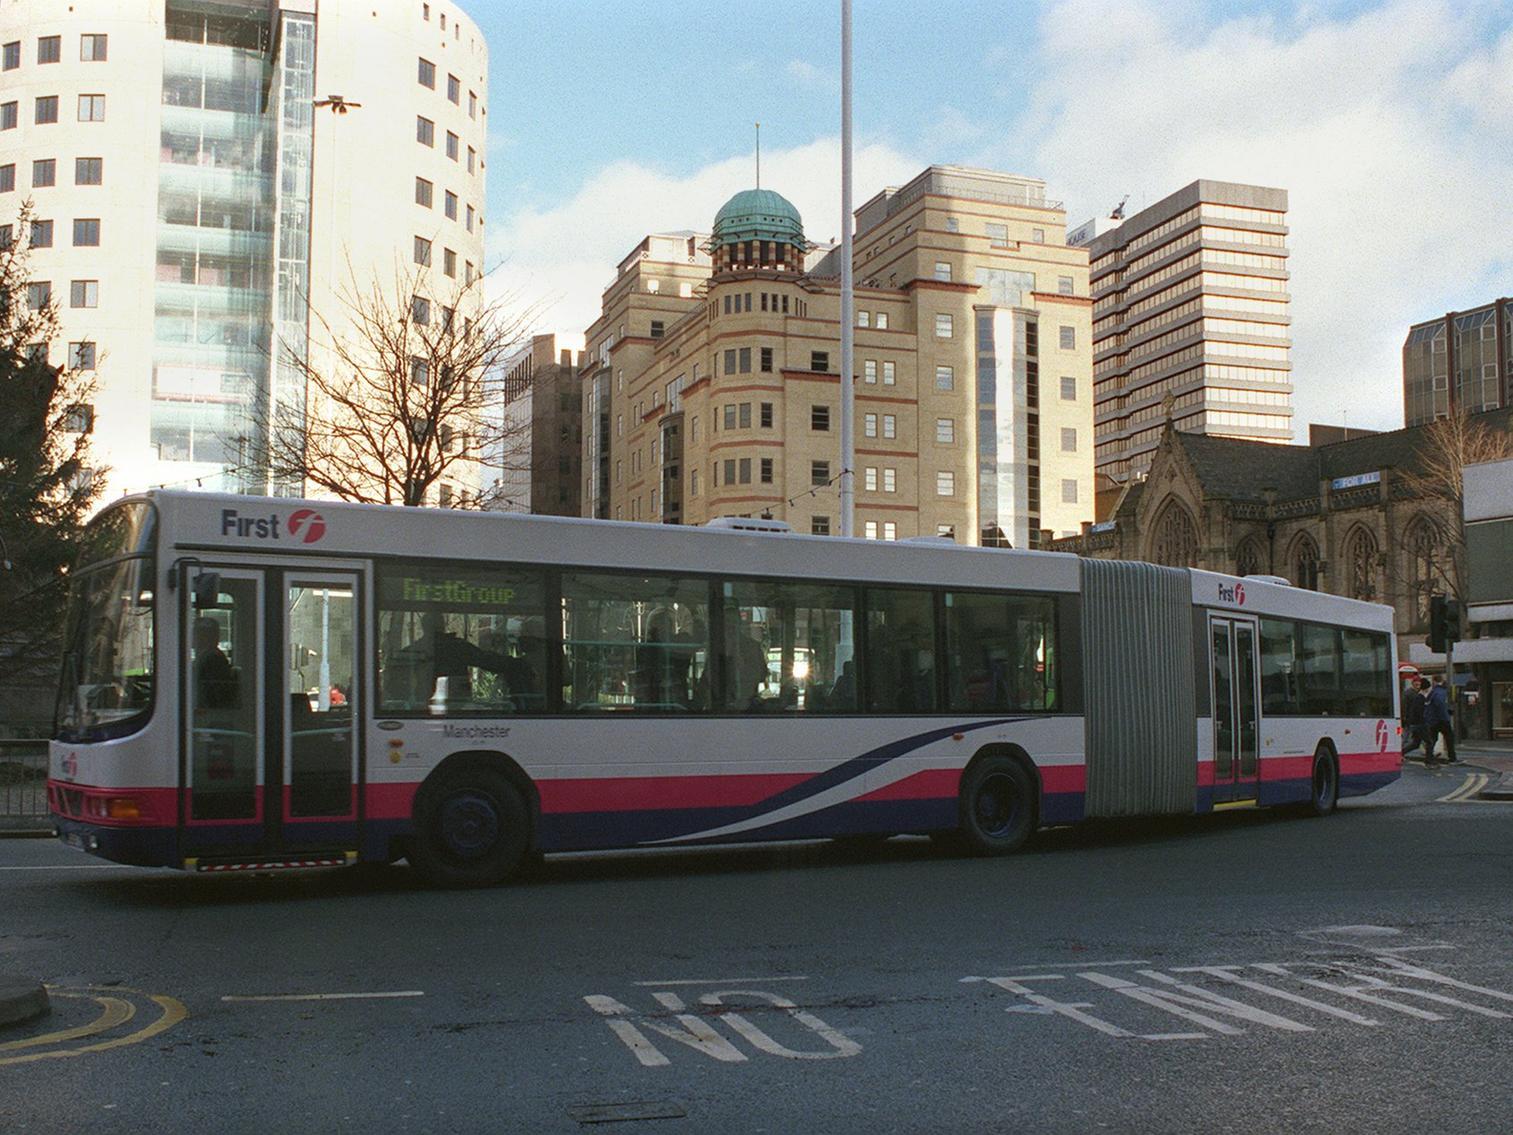 This new-style articulated 'bendy' bus arrived onto the streets of Leeds.